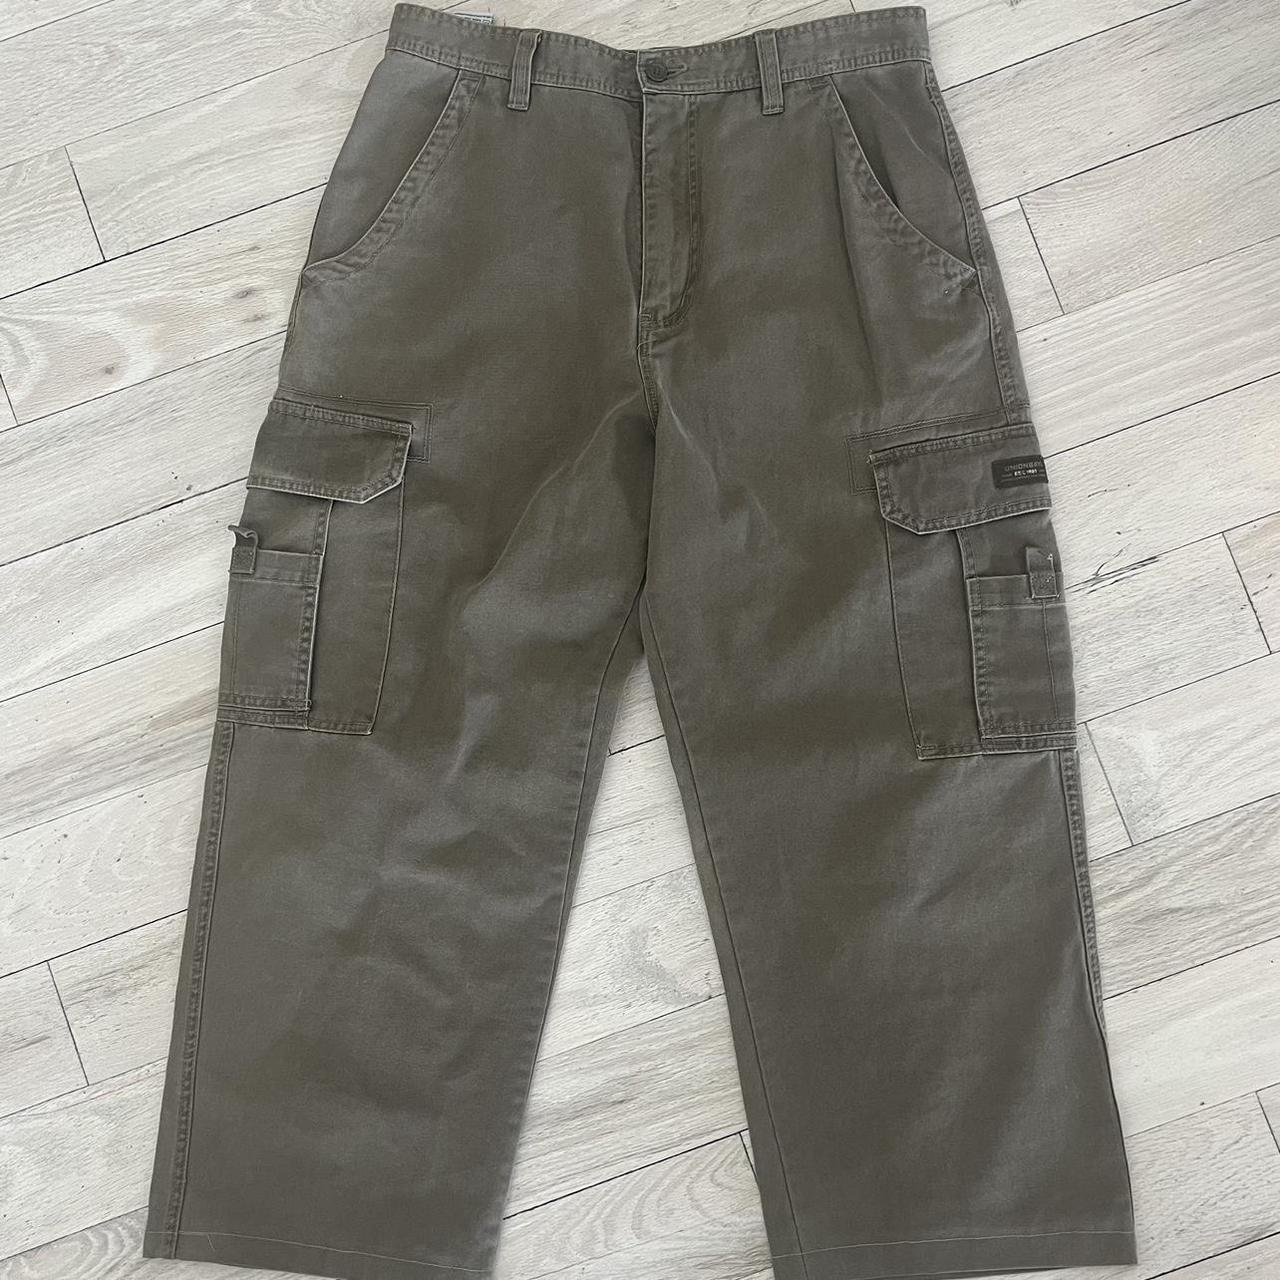 Union Bay cargos in excellent condition. These are... - Depop